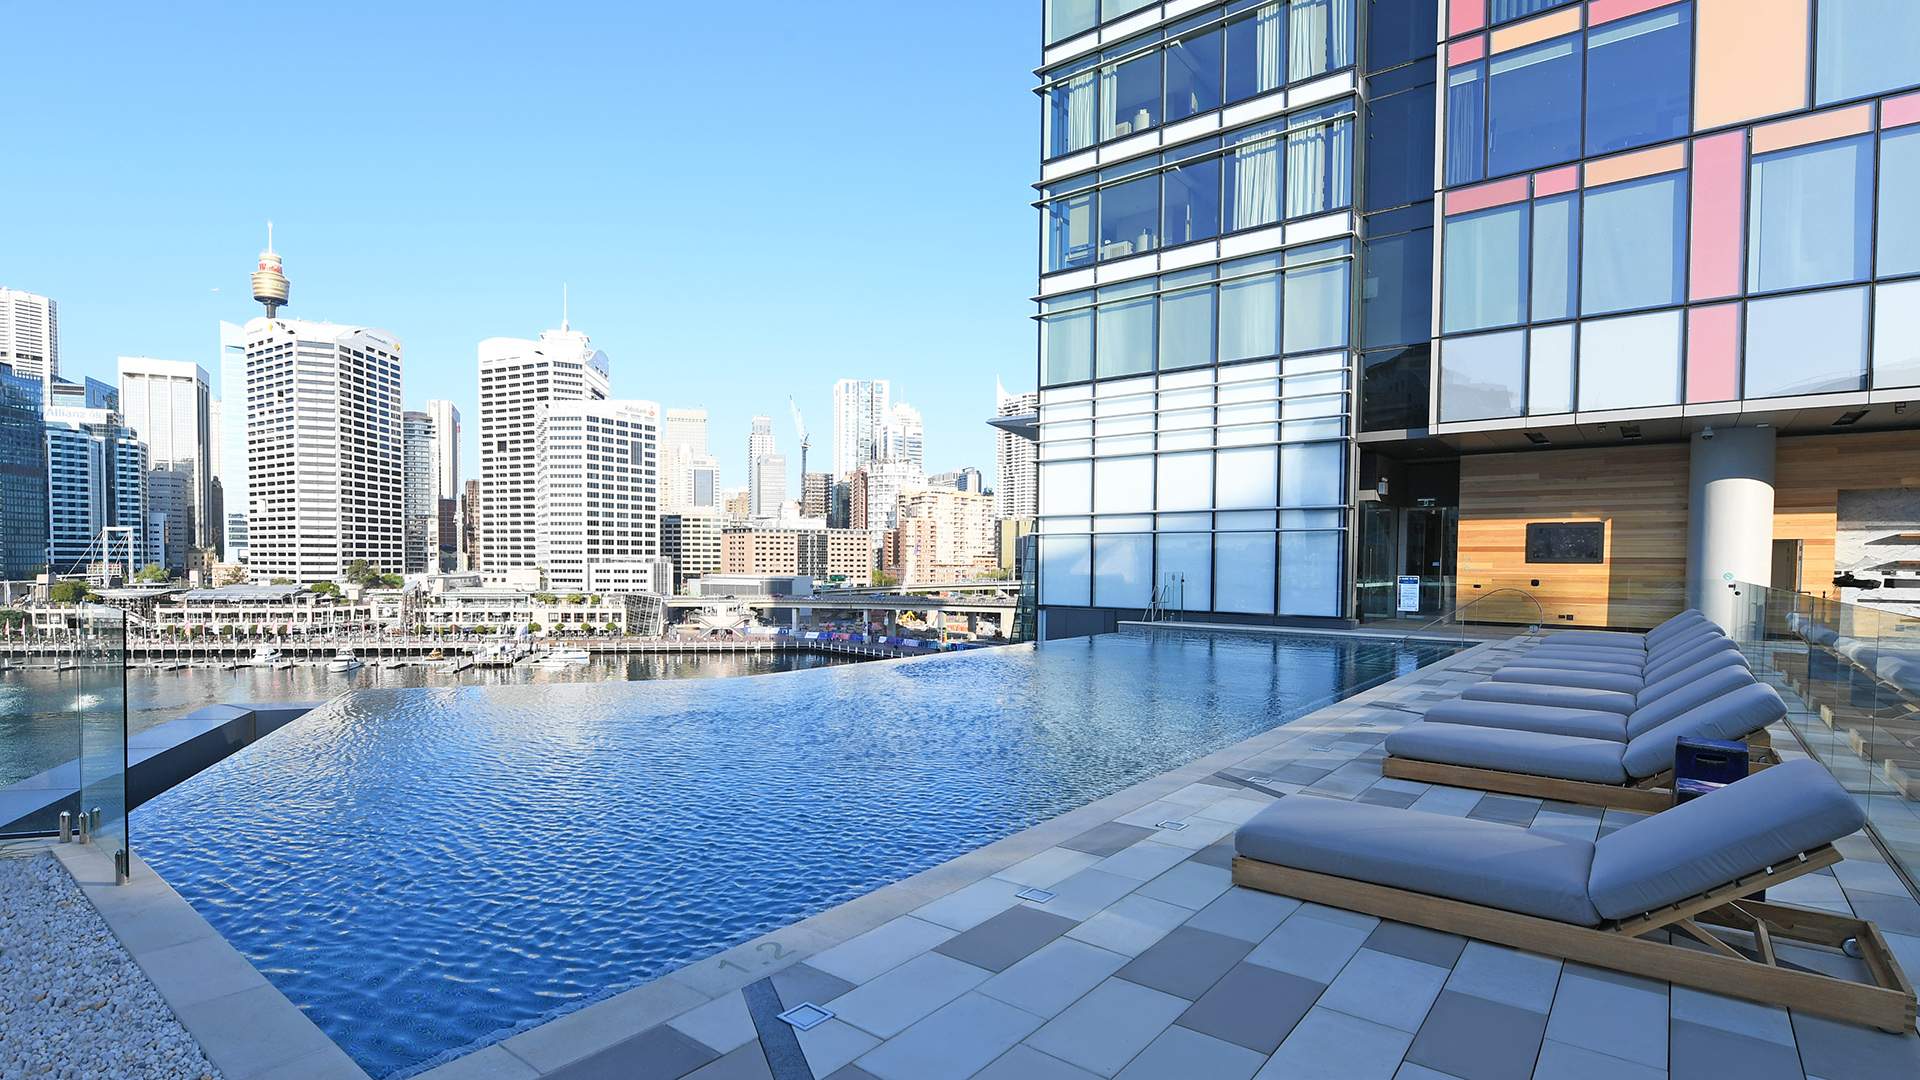 A Massive New Luxury Hotel Has Opened in Darling Harbour